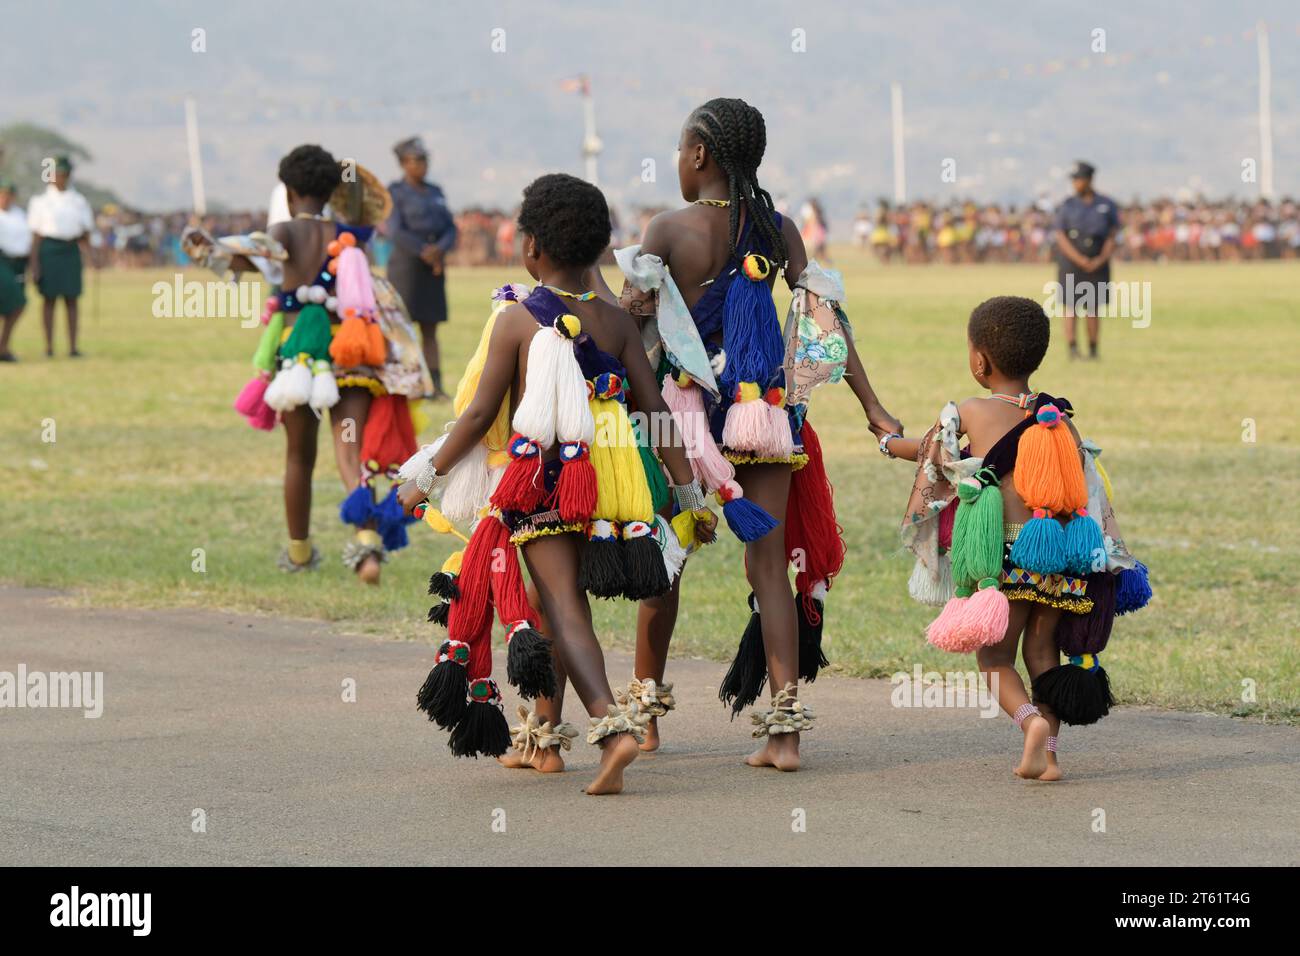 Girls in traditional dancing dress walking with women, annual Umhlanga reed dance ceremony 2023, Kingdom of Eswatini, African culture event, ethnic Stock Photo